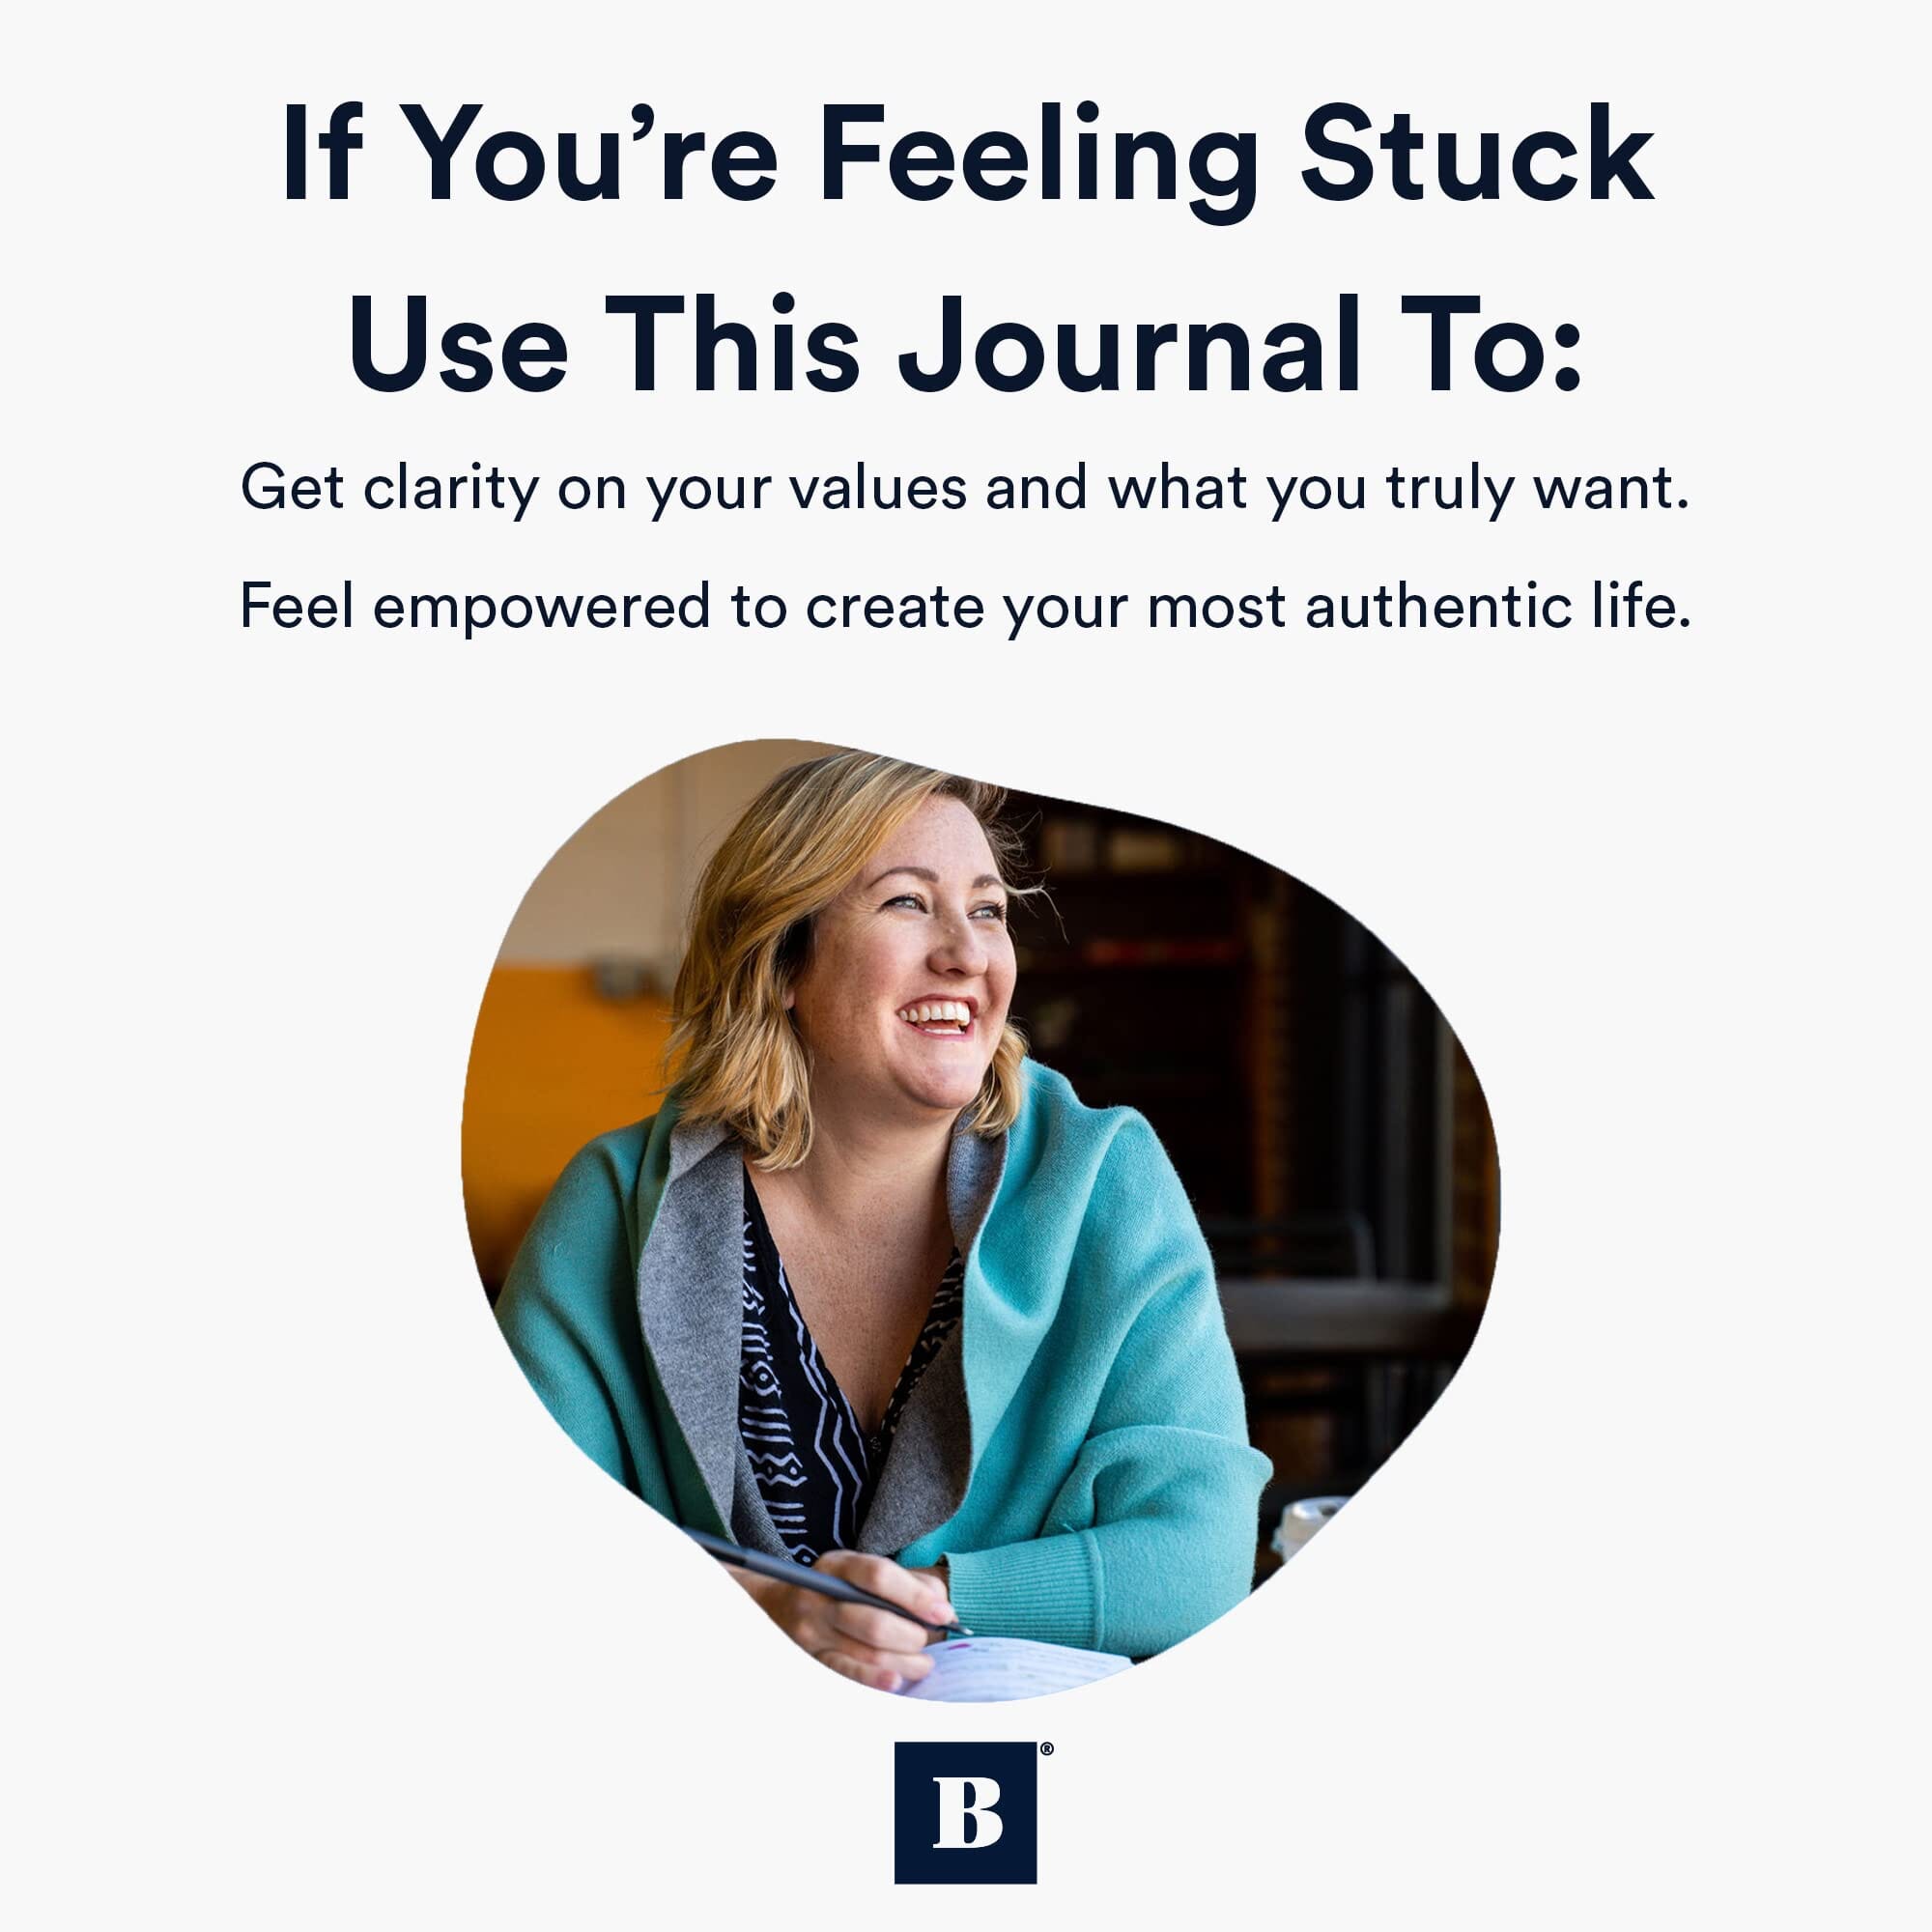 Overcoming Burnout Journal Journal Personal Growth